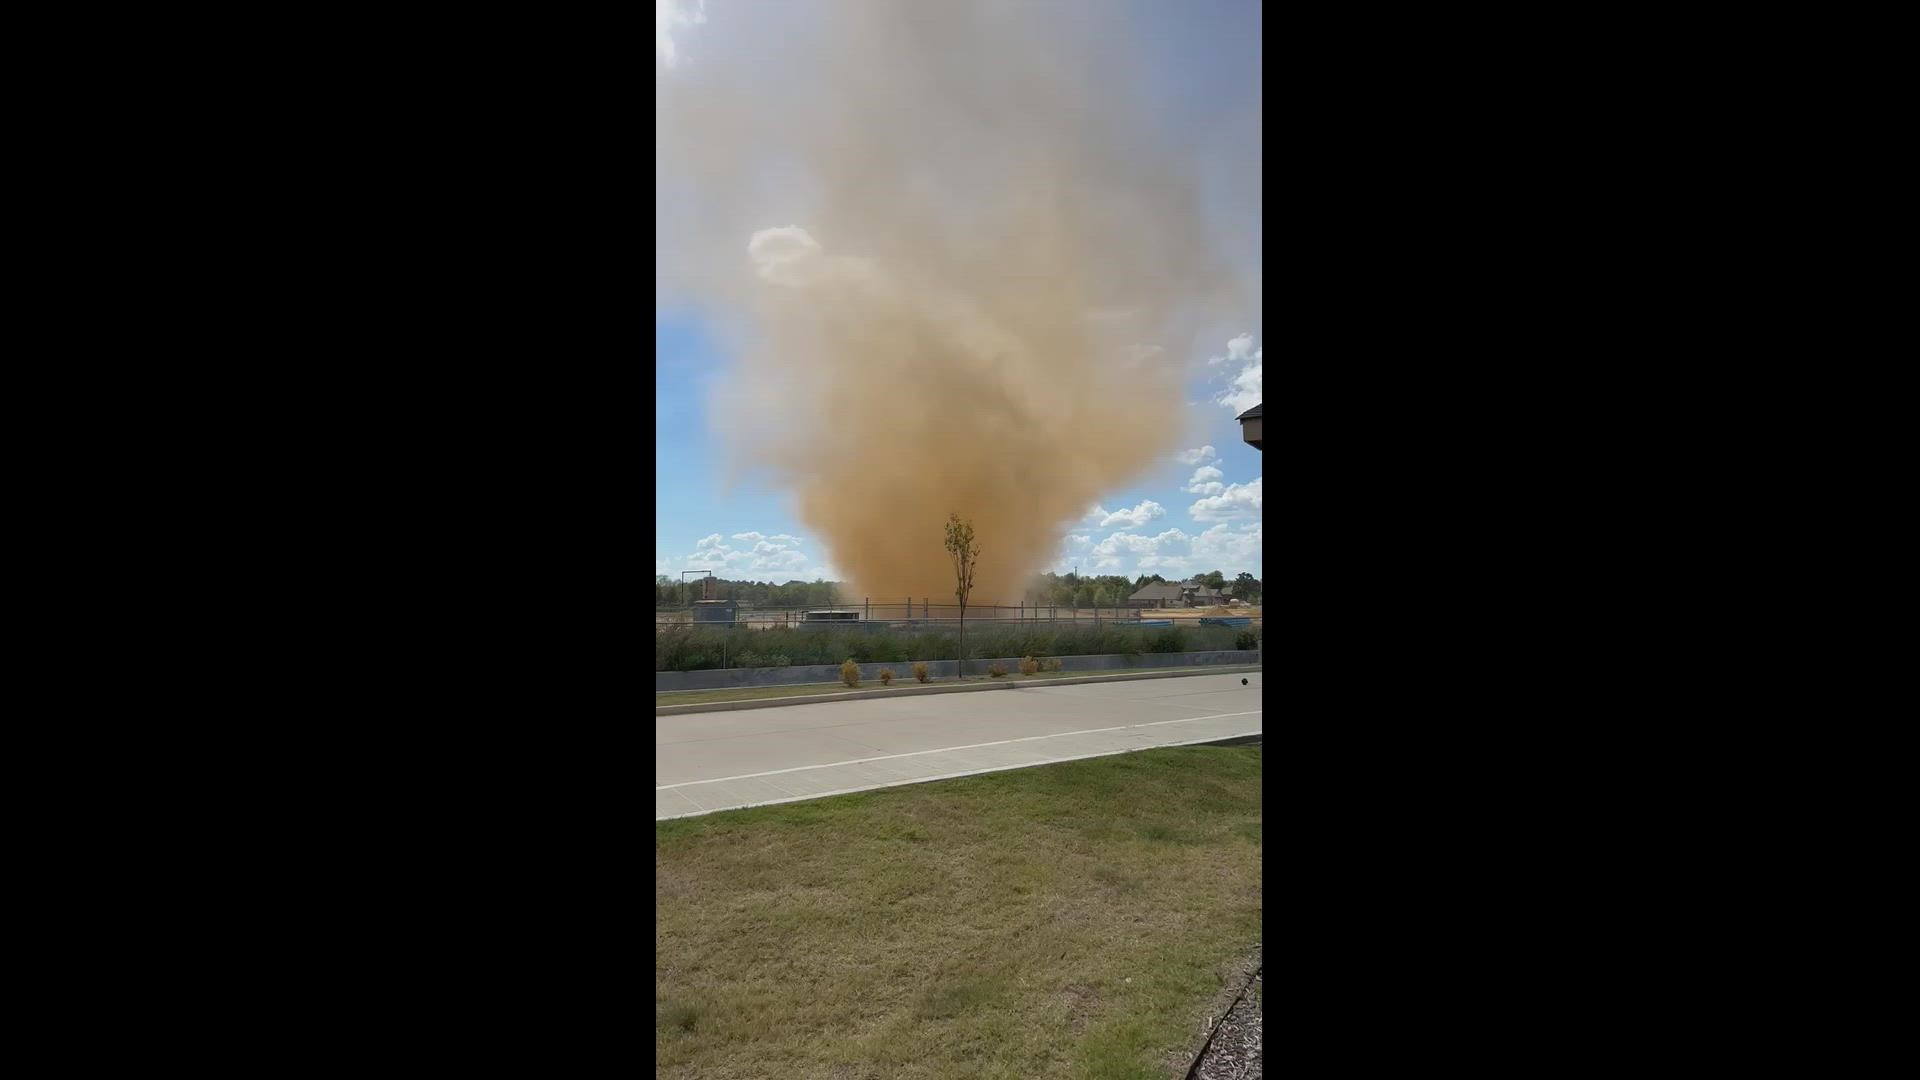 This dusty vortex spun up in a construction area off Chad Colley Blvd in Fort Smith on Sept. 19. Credit: Brandon Michael Foss.